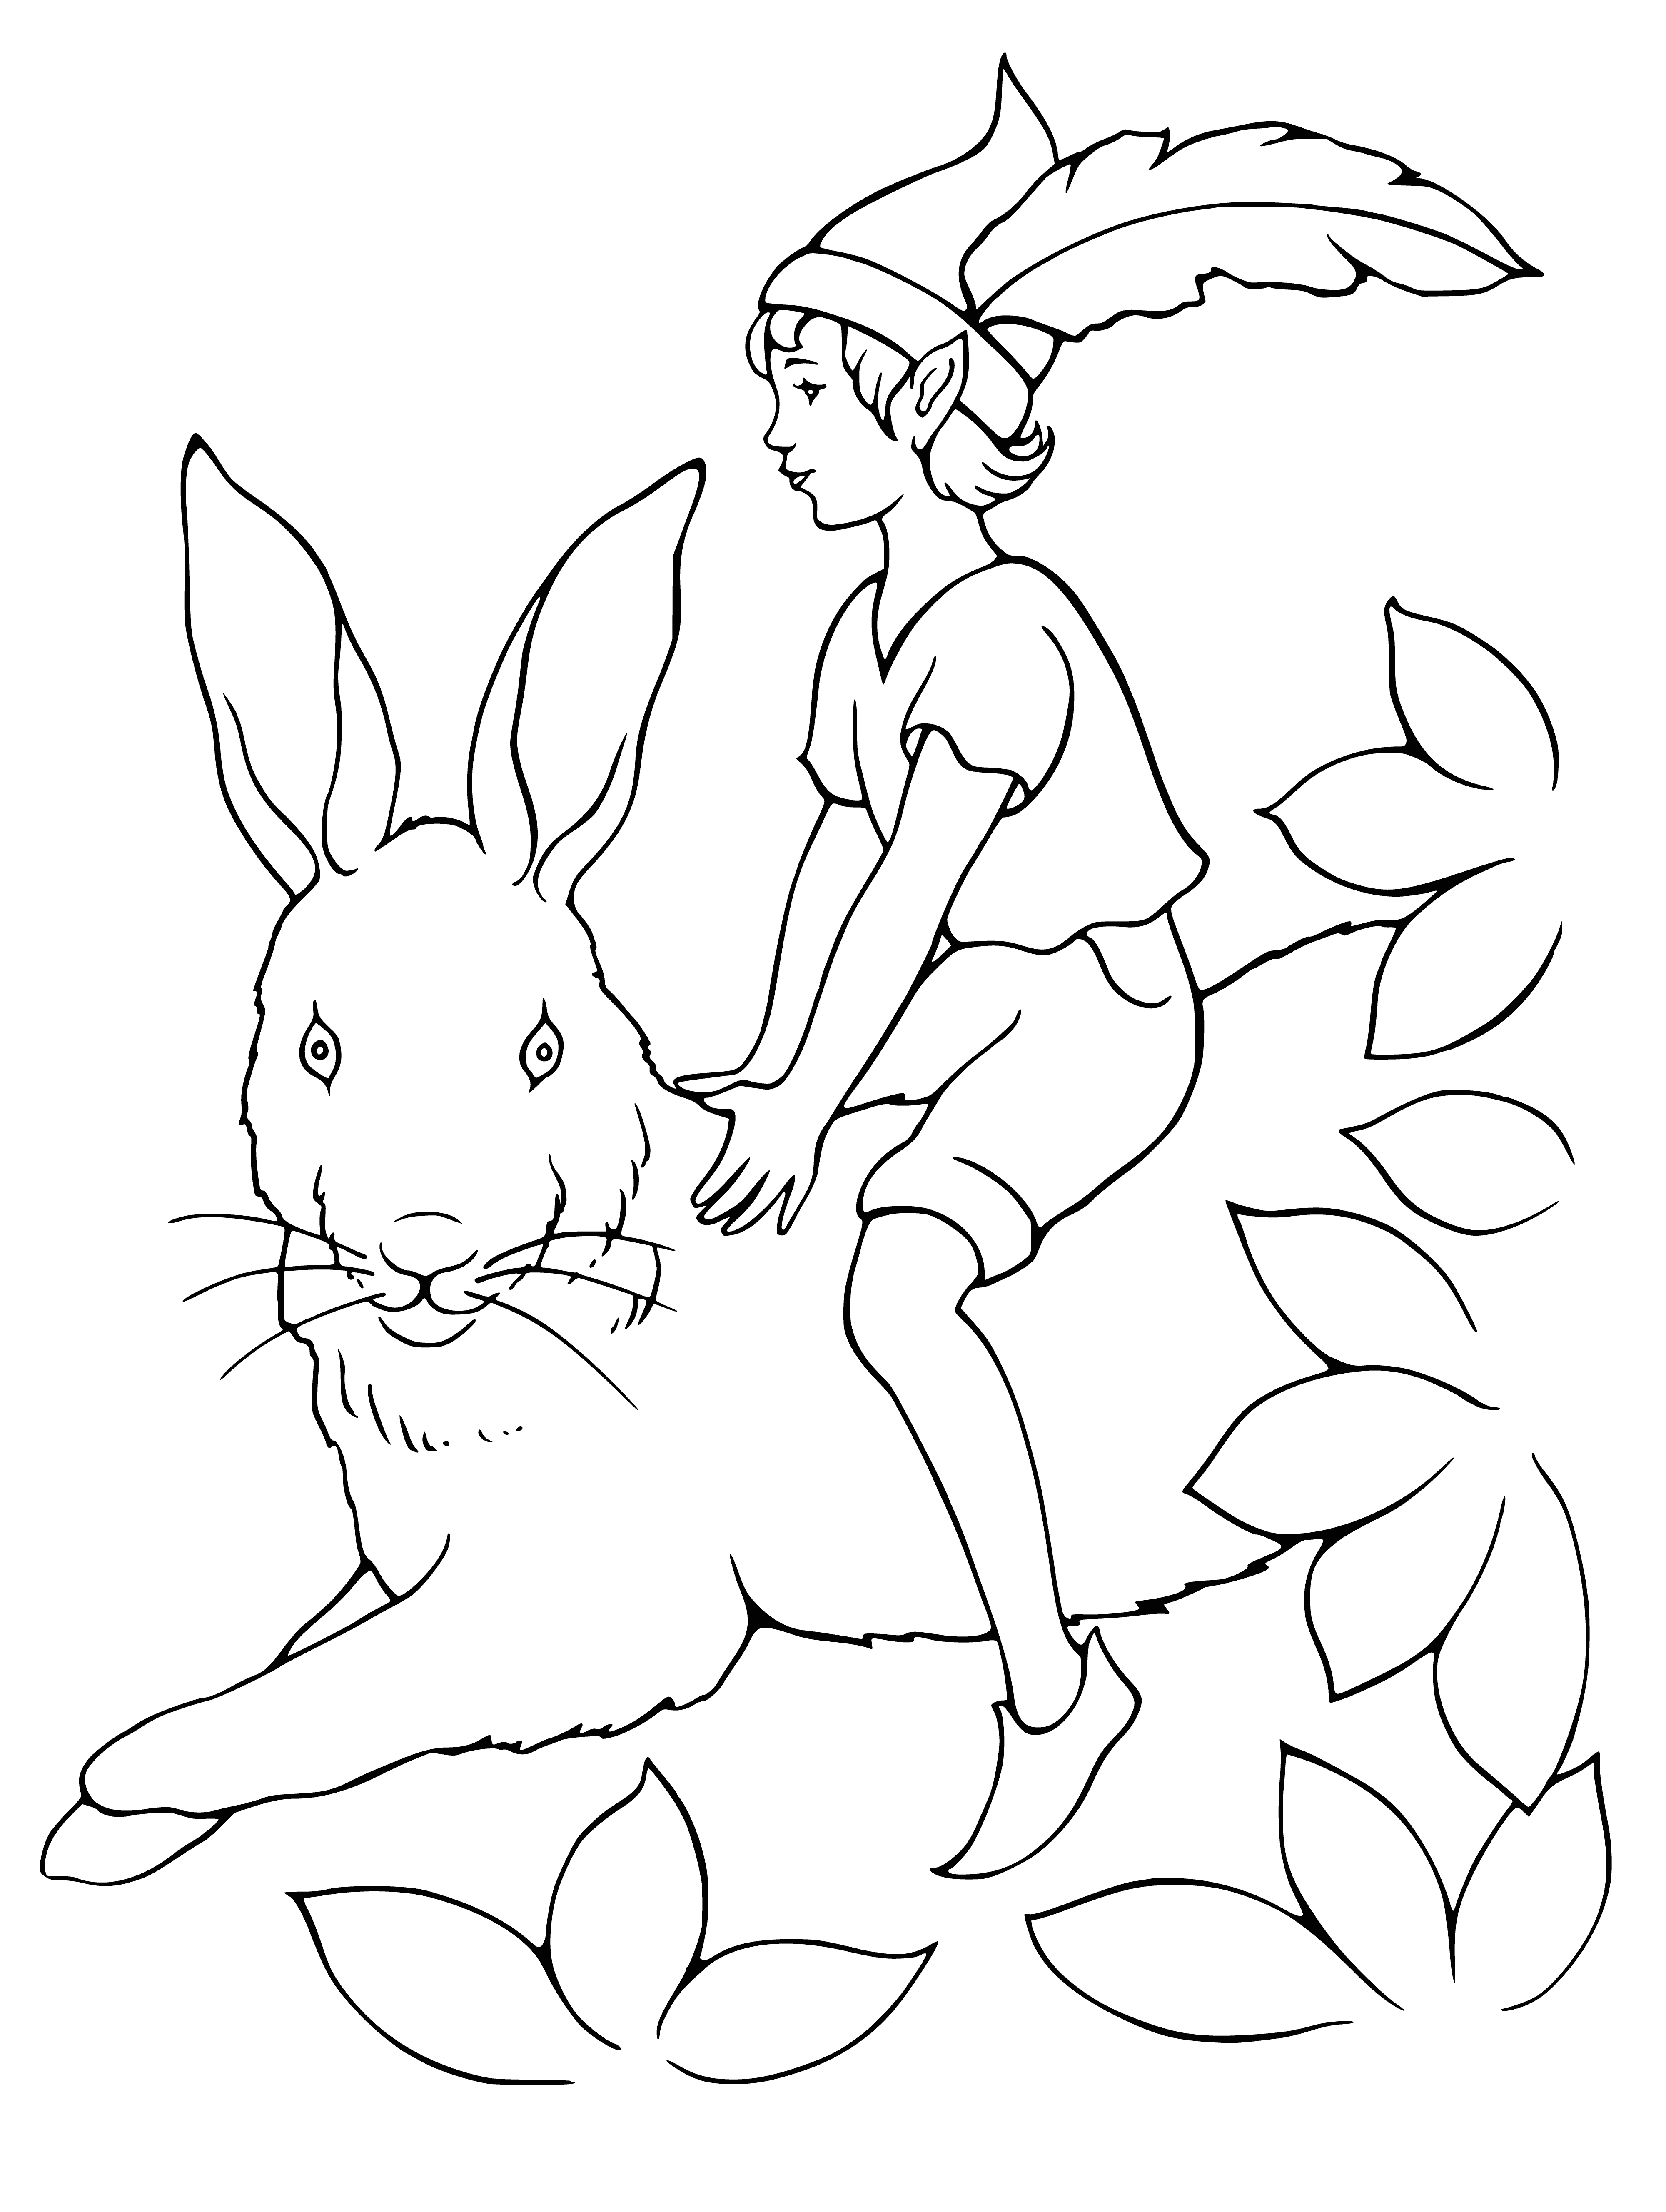 coloring page: Elf riding a spotted hare, wearing a tunic, belt, purple cape and carrying a bow and arrow.